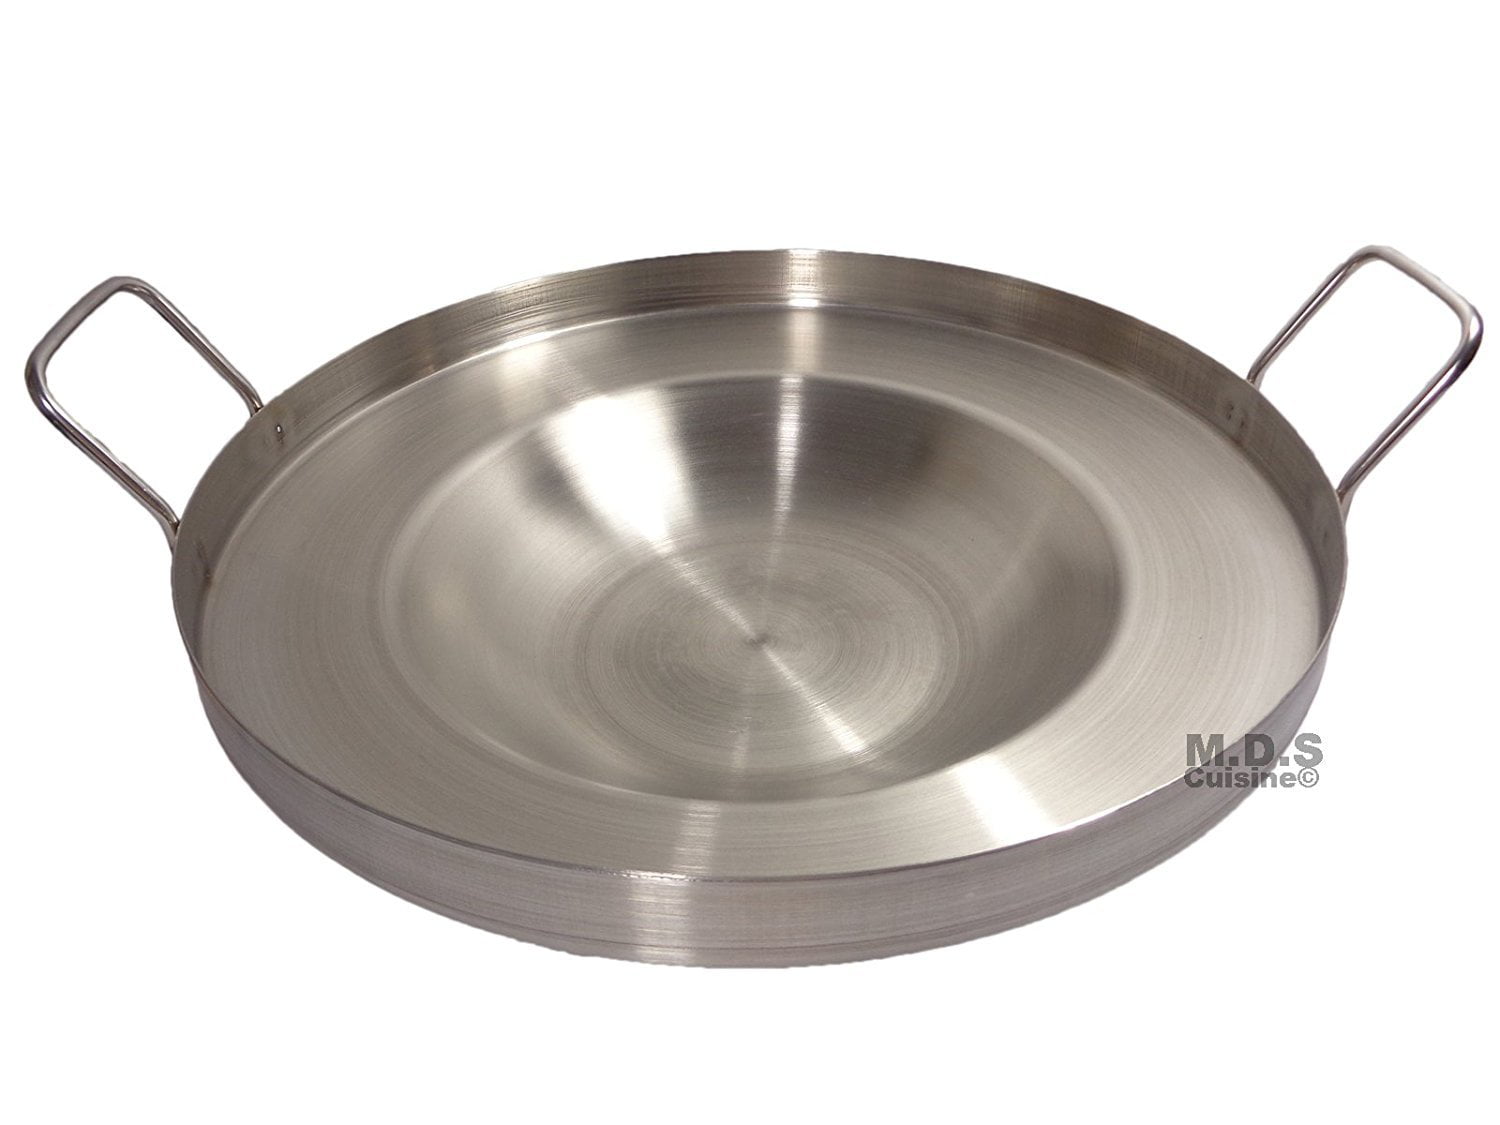 Concave Comal Frying Pan 16 Inch Stainless Steel Cookware 